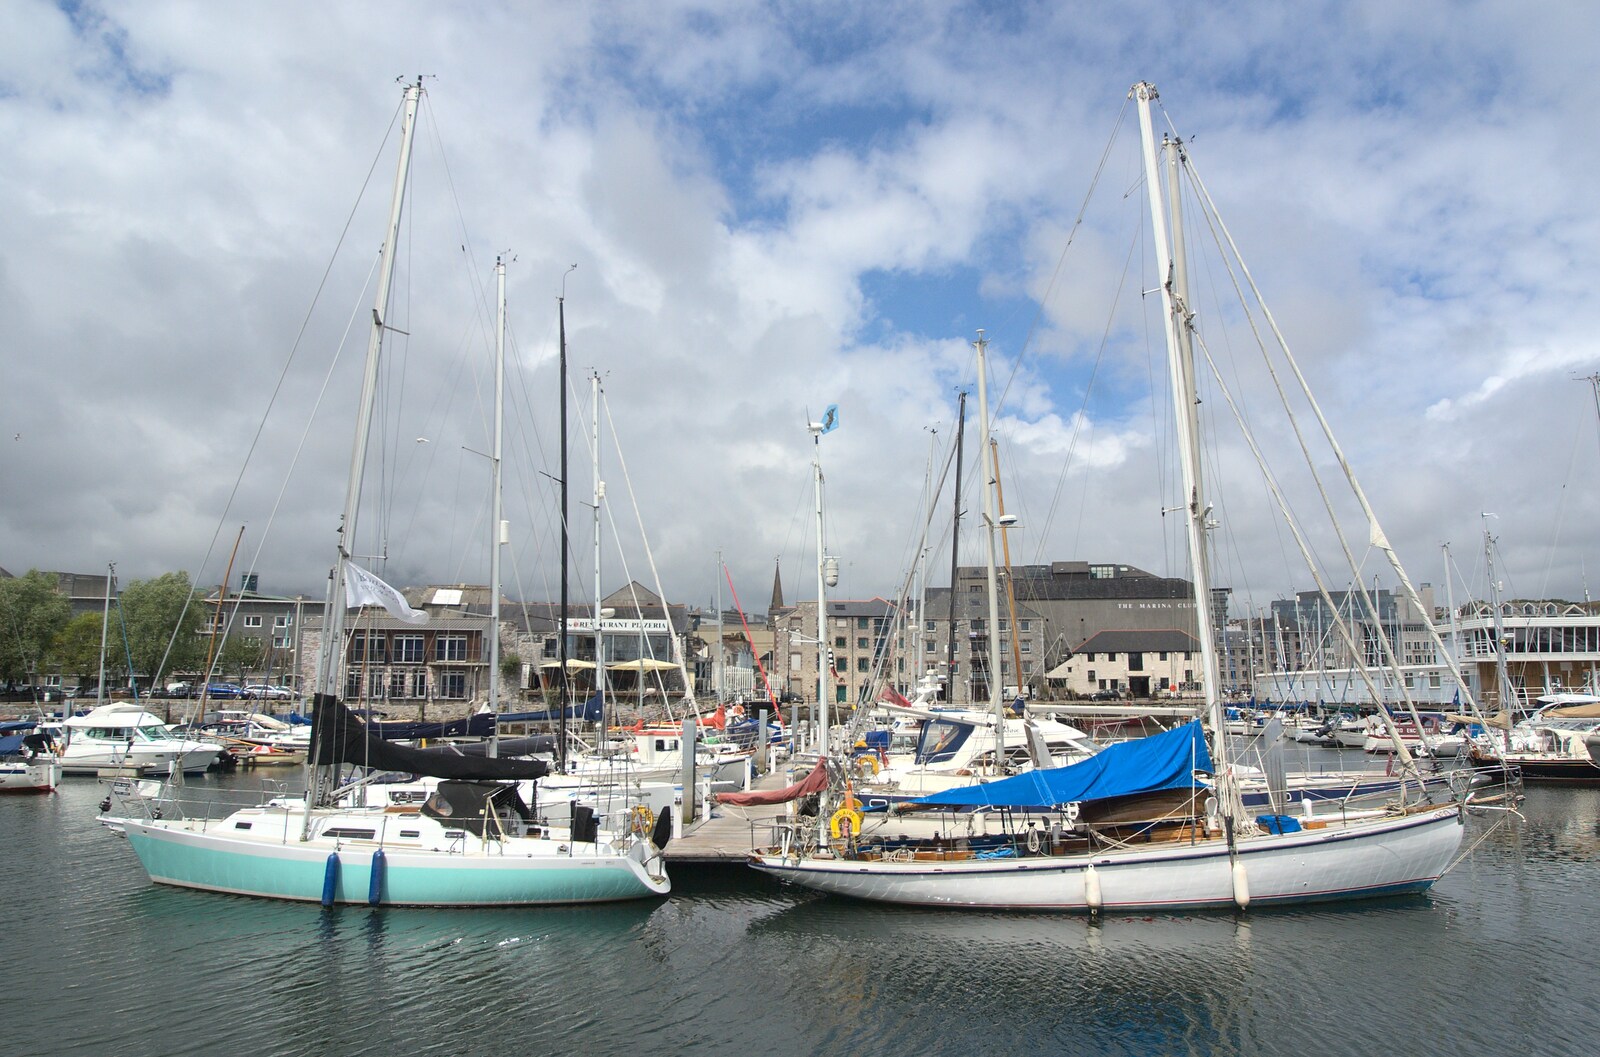 Yachts in Sutton Harbour from A Camper Van Odyssey: Charmouth, Plymouth, Dartmoor and Bath - 20th June 2011